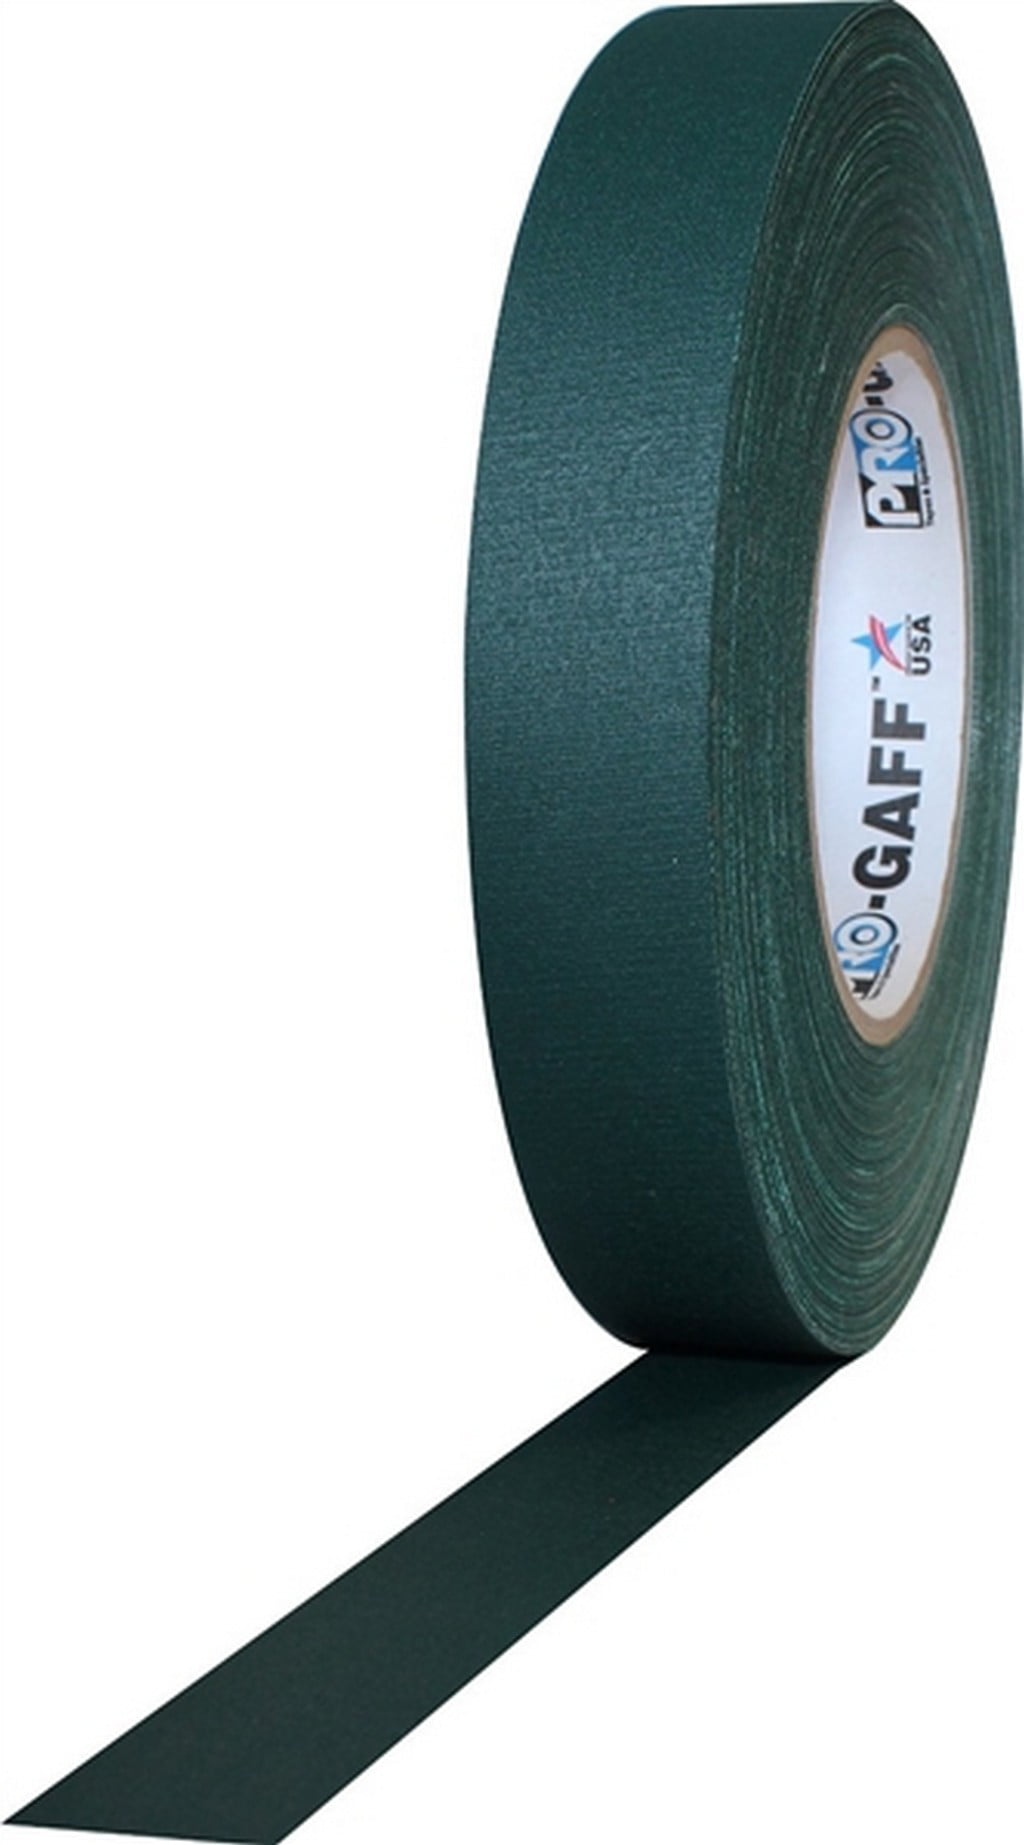 1 Width ProTapes Pro Gaff Premium Matte Cloth Gaffers Tape with Rubber Adhesive Pack of 1 Fluorescent Blue 50 yds Length x